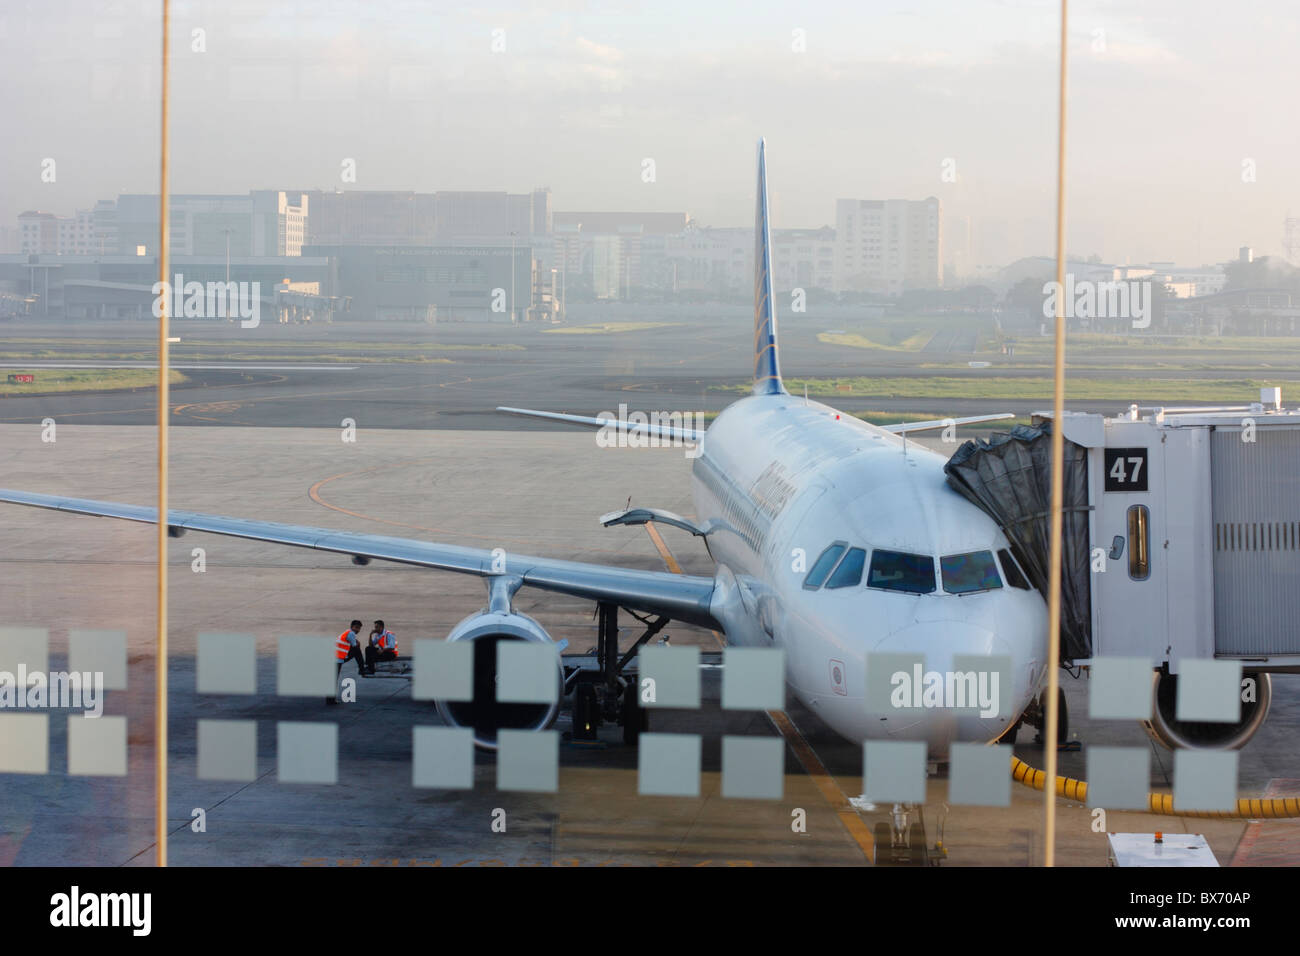 A passenger jet during early morning. Ninoy Aquino International Airport in Manila, Philippines. Asia Stock Photo